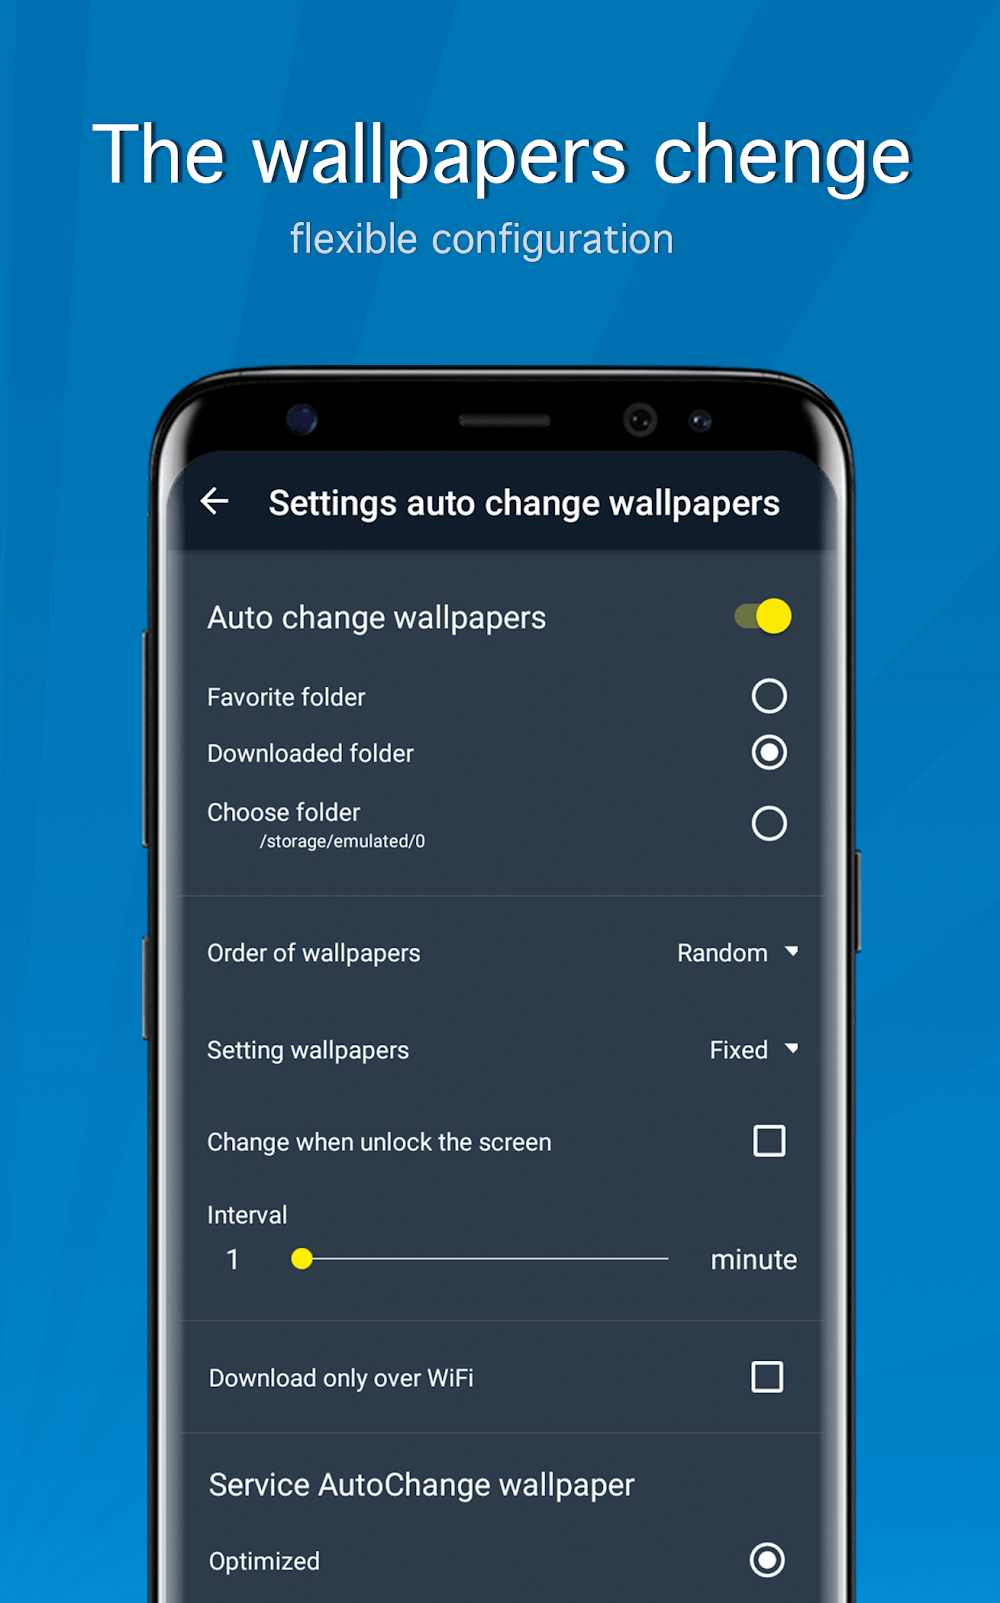 7Fon - Wallpapers 4K (PRO) v5.7.3 build 345 [Paid] - Platinmods.com -  Android & iOS MODs, Mobile Games & Apps